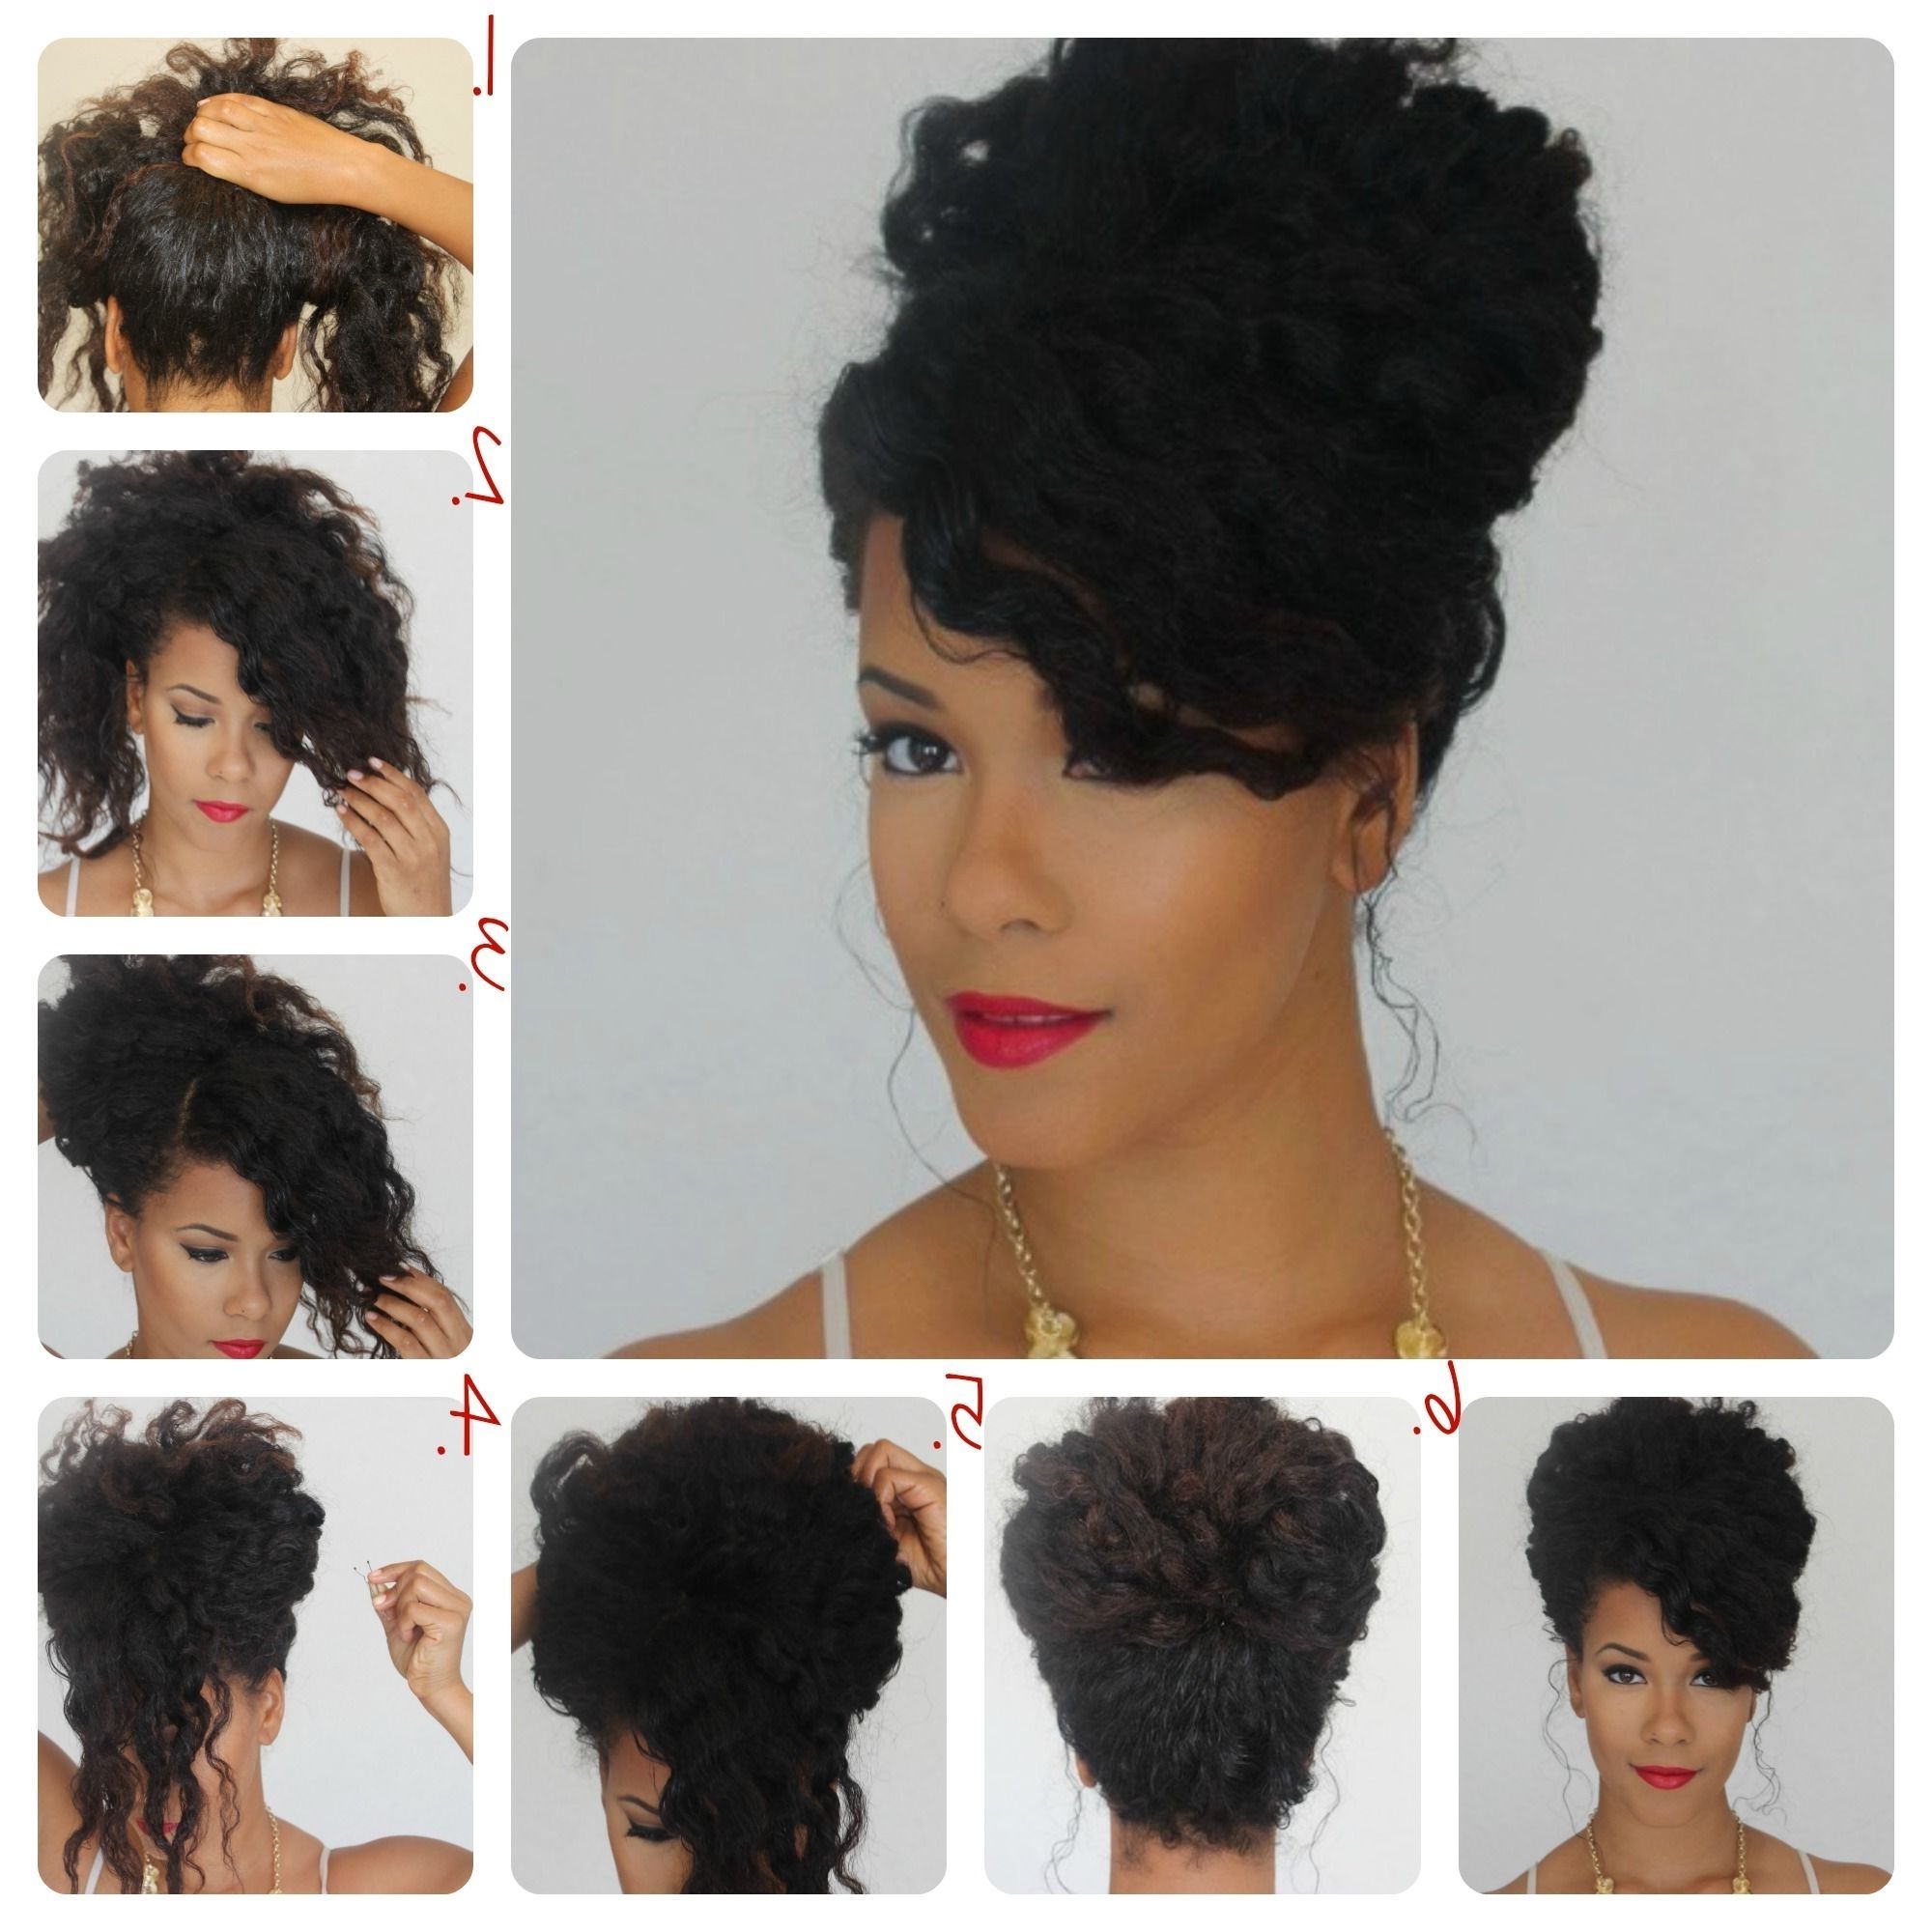 17 Incredibly Pretty Styles For Naturally Curly Hair (View 6 of 15)